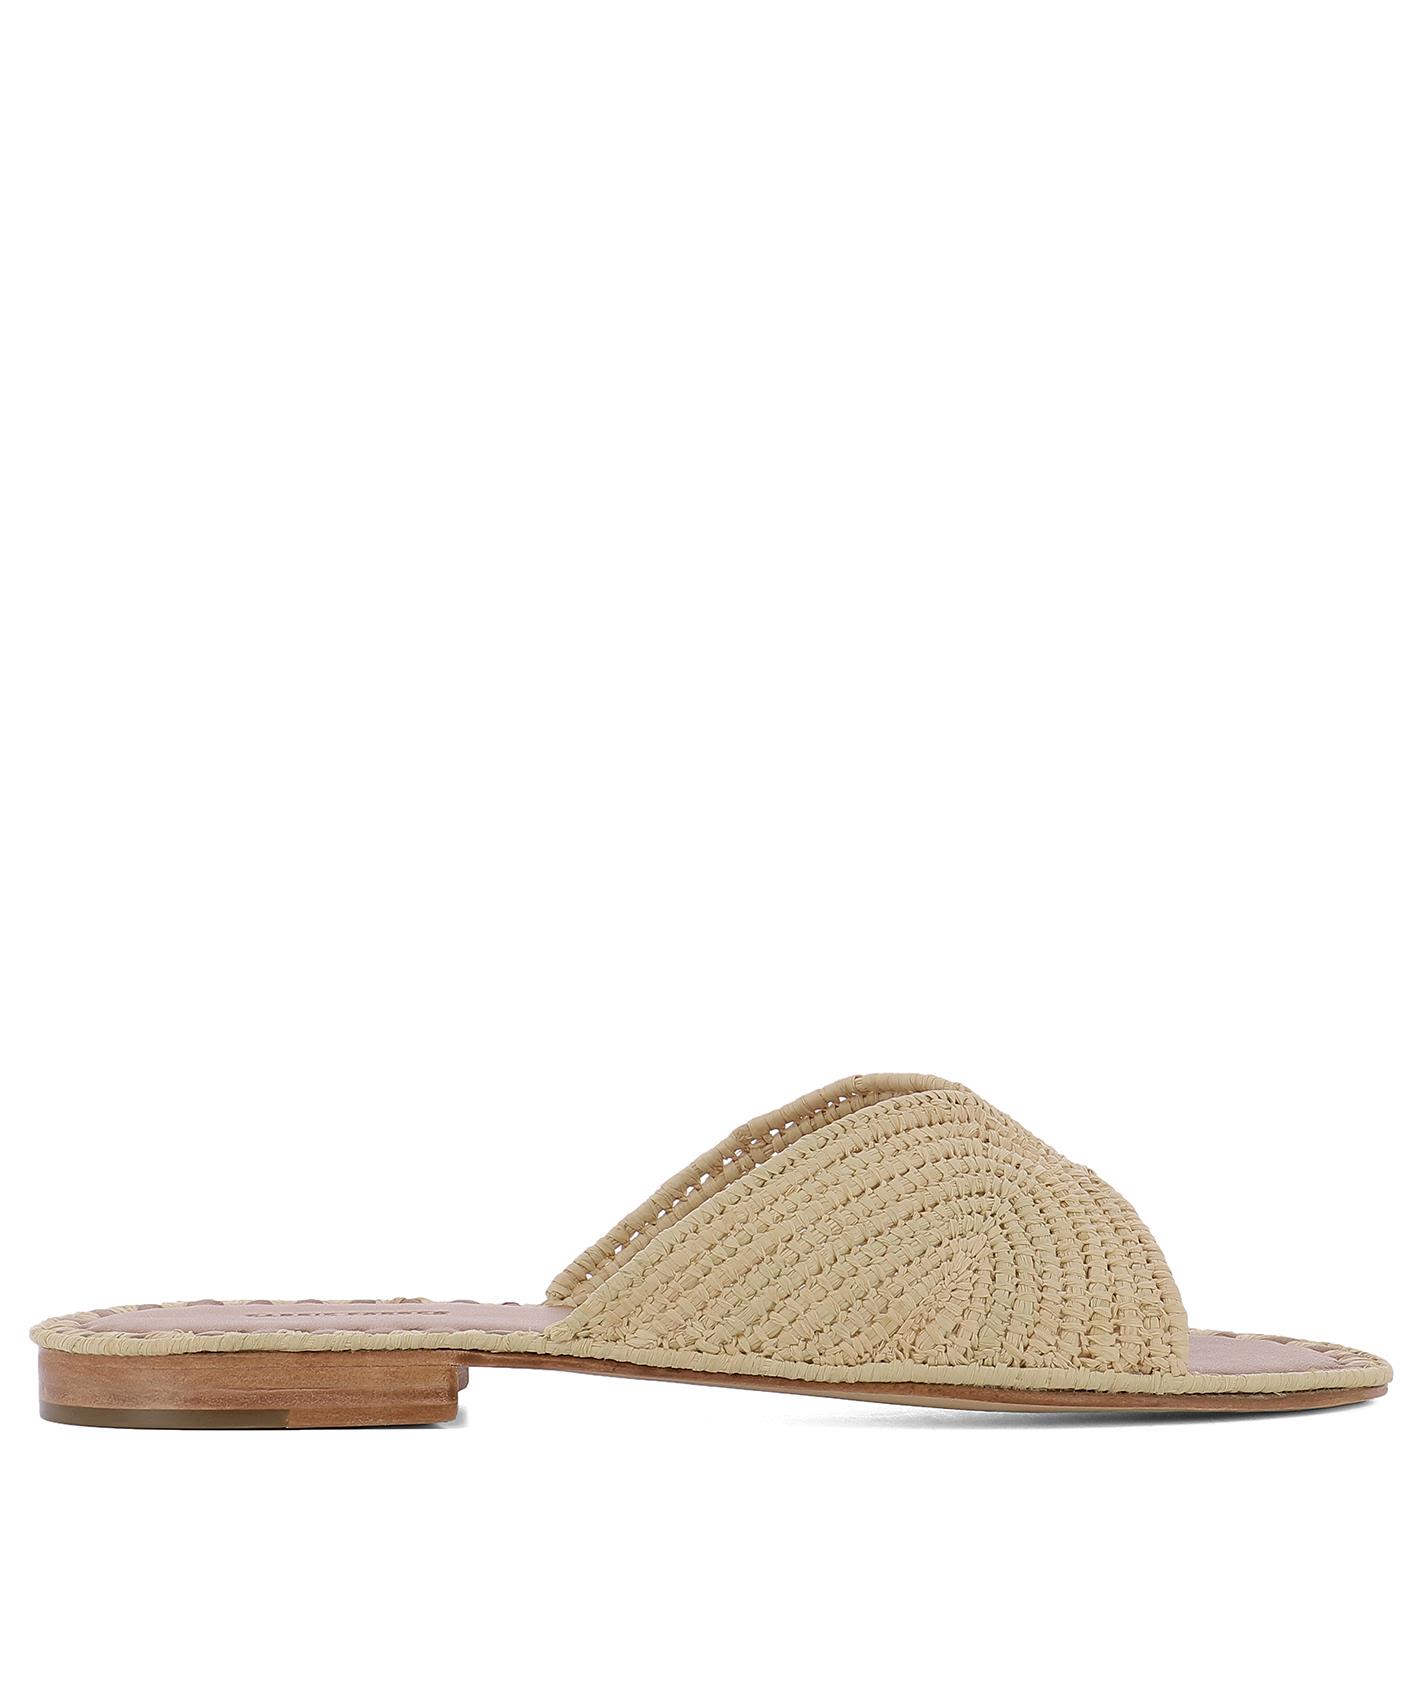 CARRIE FORBES BEIGE FABRIC SALON SANDALS,10606888